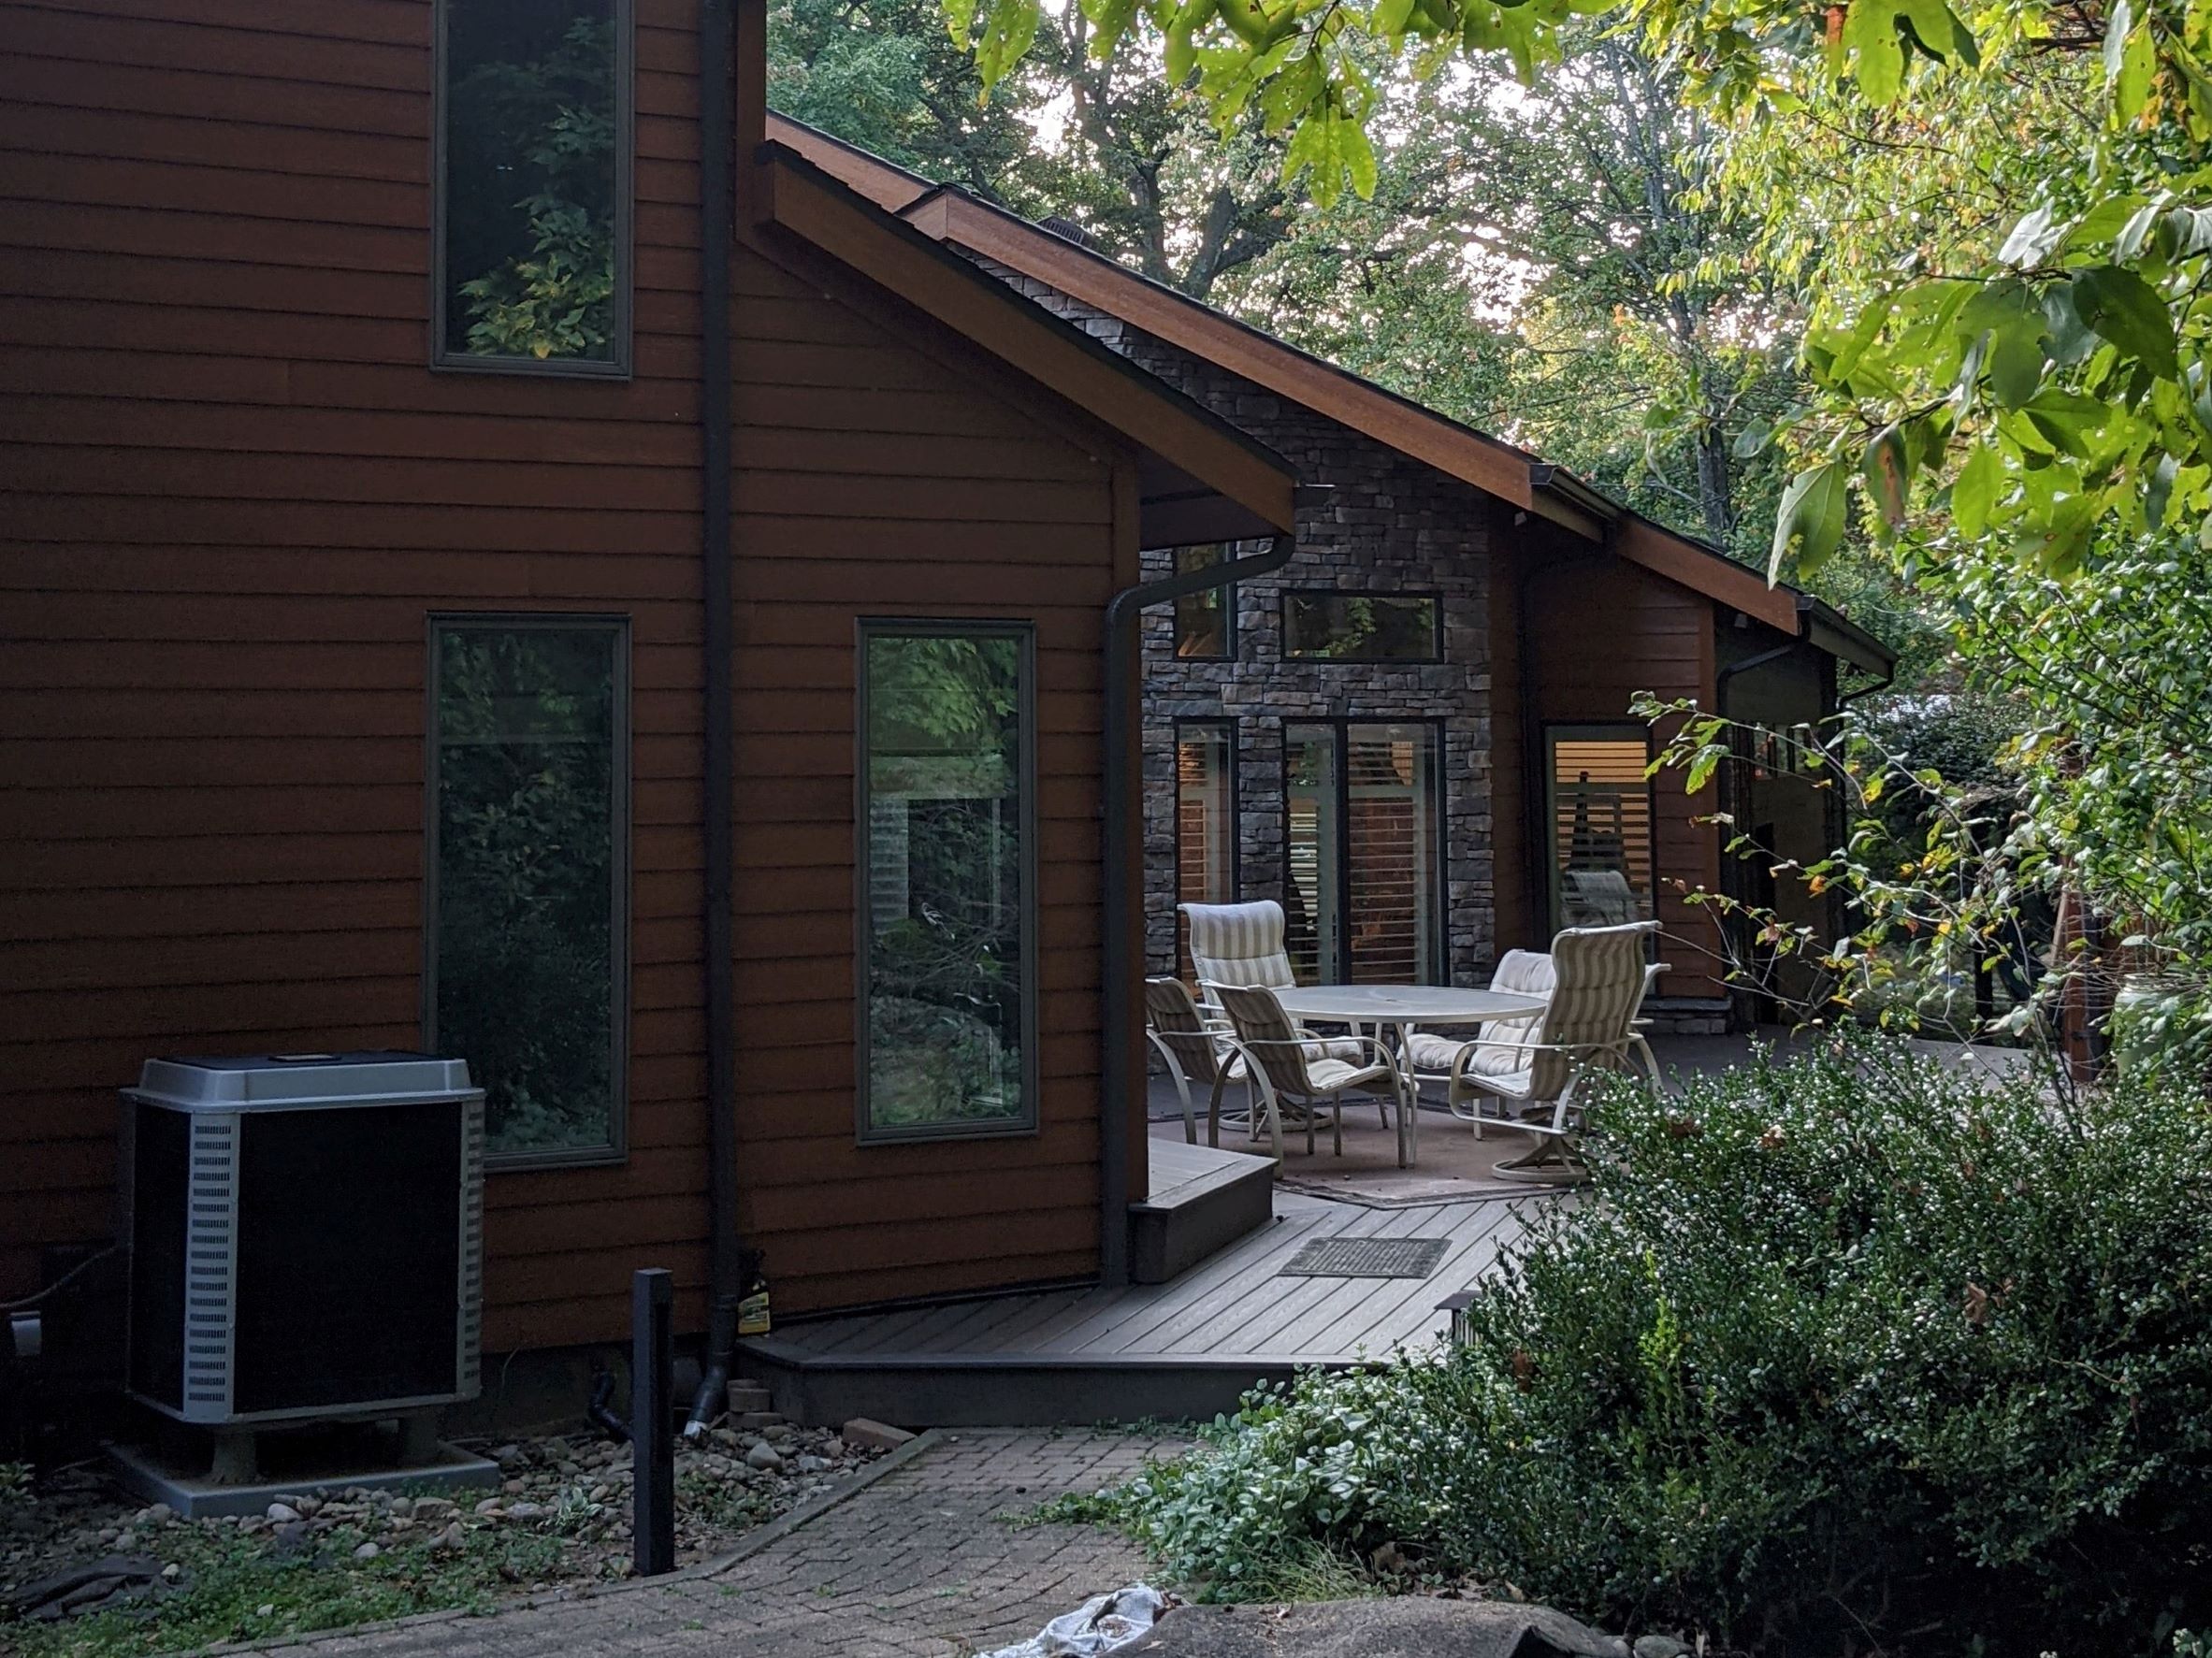 Isolated back porch with Contemporary House addition with stone, wood siding in the background, surrounded by trees and vegetation outside of Pittsburgh Pennsylvania